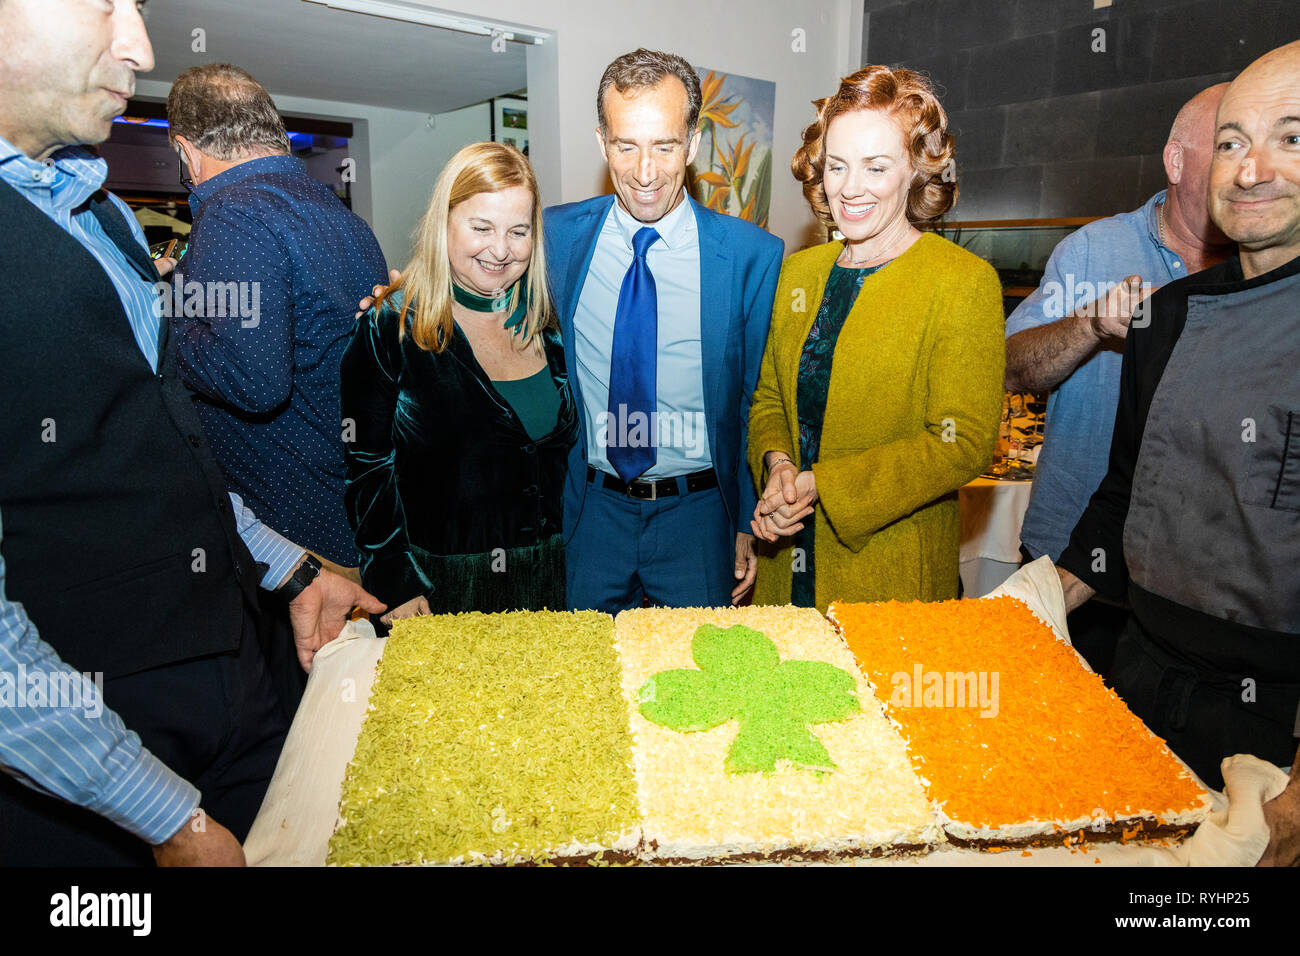 Costa Adeje Golf Club, Adeje, Tenerife, Spain. 13th March 2019. A giant tricolor cake with a green shamrock is presented at a St. Patricks Day Gala dinner in the Golf Costa Adeje club house, hosted by the Honorary Irish Consul, Álvaro de la Bárcena Argany, with his wife Mairead Ryan, (right), and Tessa Willis García Talavera, (left), vice consul of the Consulate of Ireland in Tenerife. © Phil Crean Credit: Phil Crean A/Alamy Live News Stock Photo